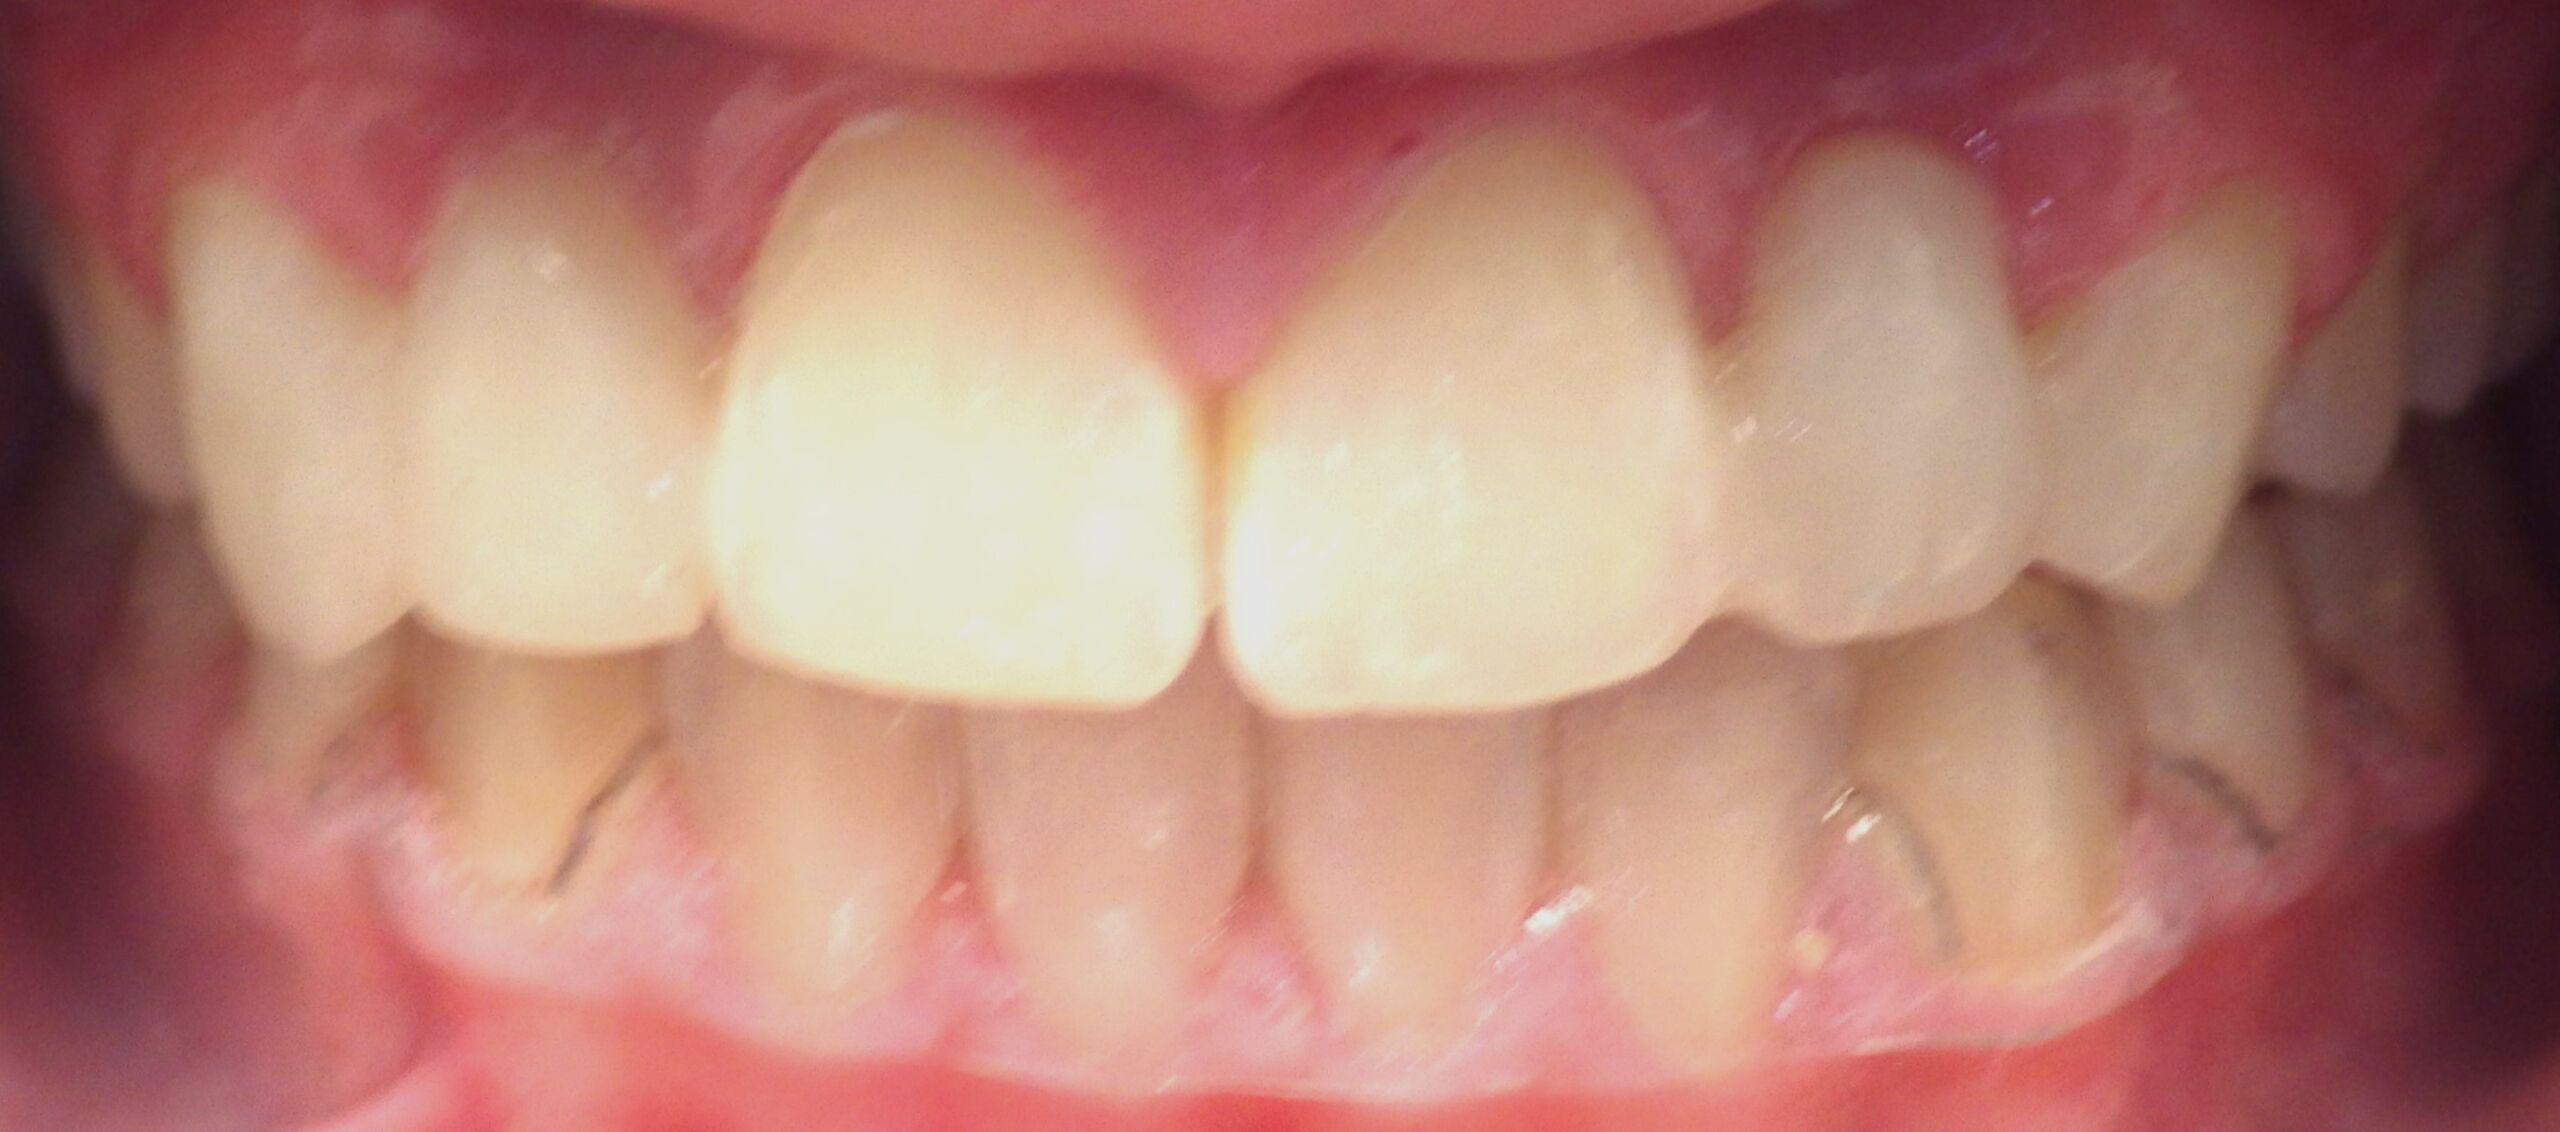 The results after replacing missing teeth at Mango Dental in Greensboro, NC.